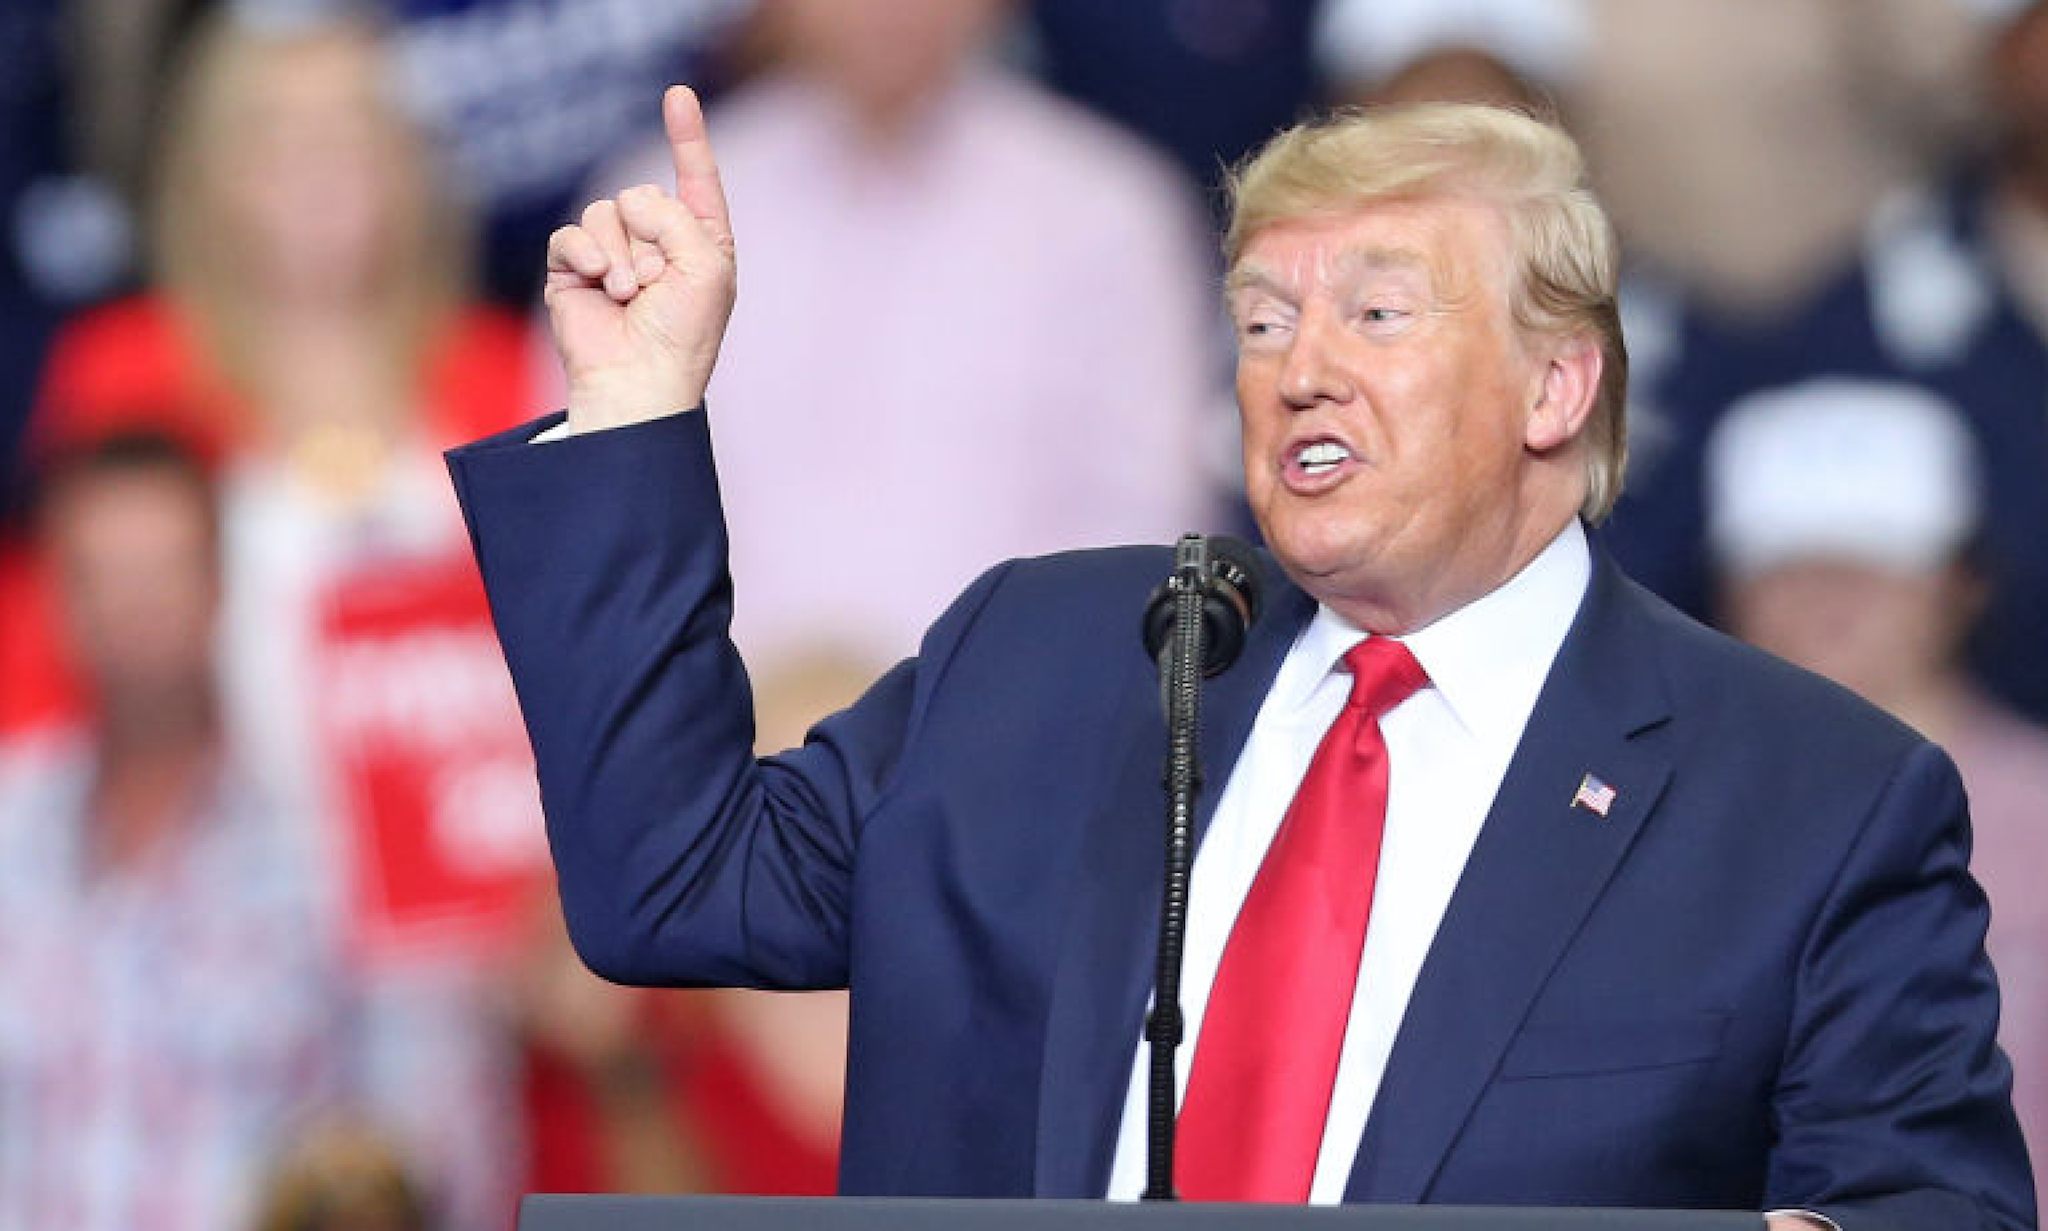 U.S. President Donald Trump speaks during a "Keep America Great" rally at the Monroe Civic Center on November 06, 2019 in Monroe, Louisiana.